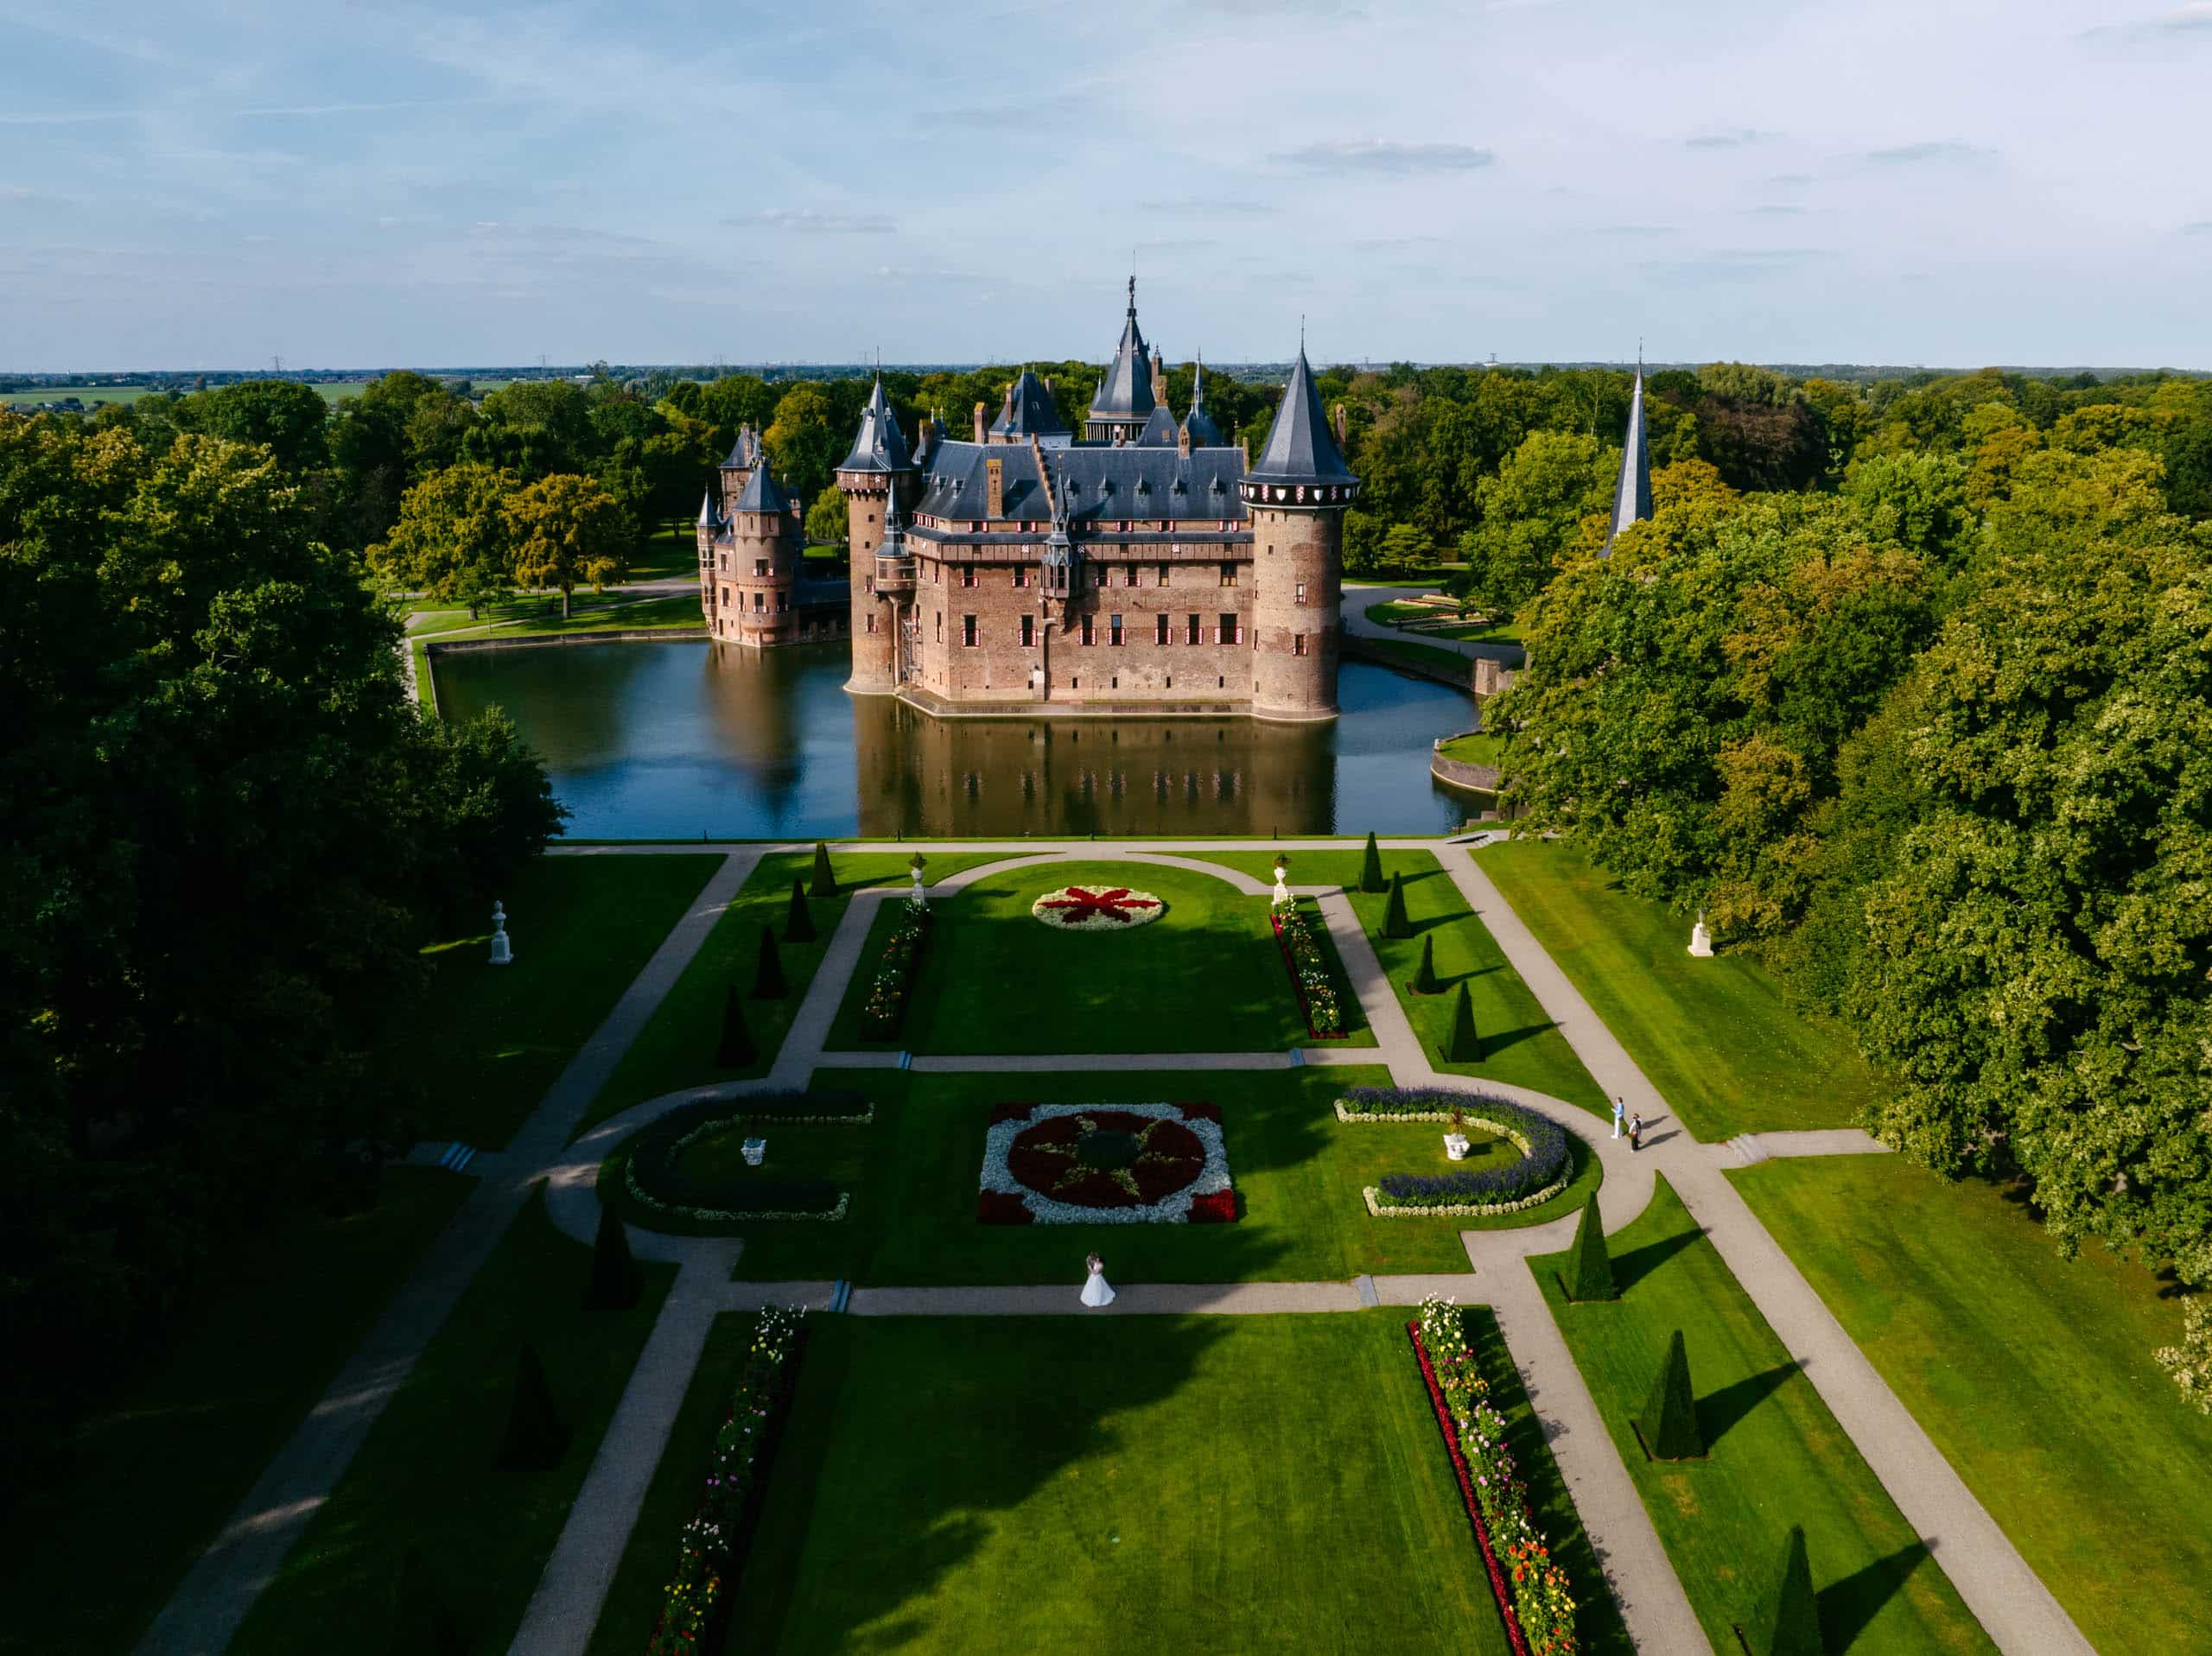 An aerial view of Castle de Haar, a castle surrounded by trees.